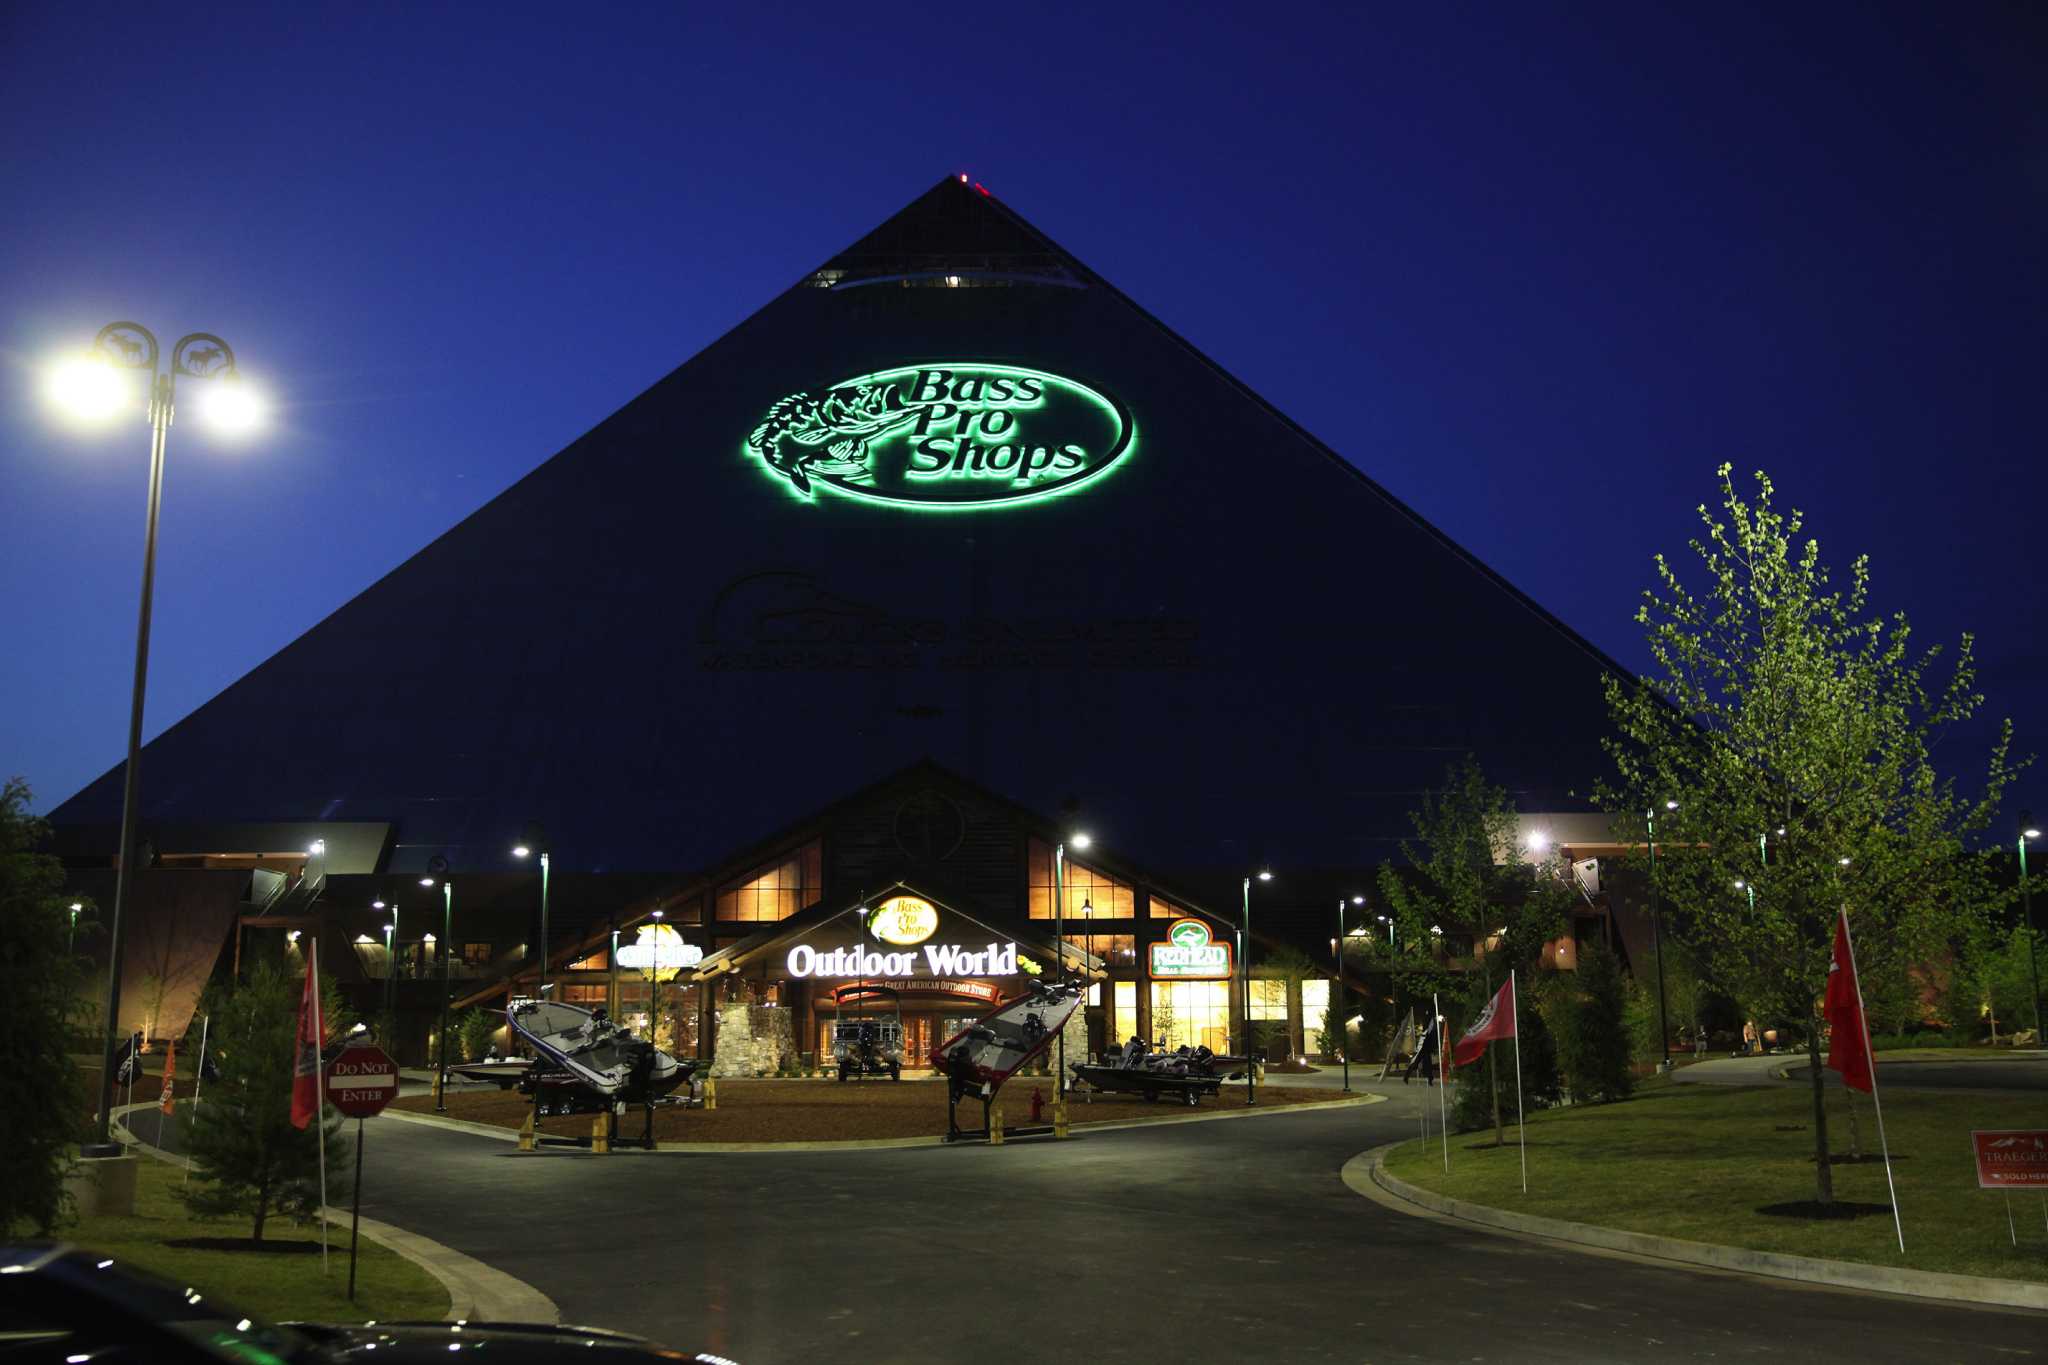 The Pyramid now houses big Bass Pro Shop and hotel rooms for die-hard shopp...